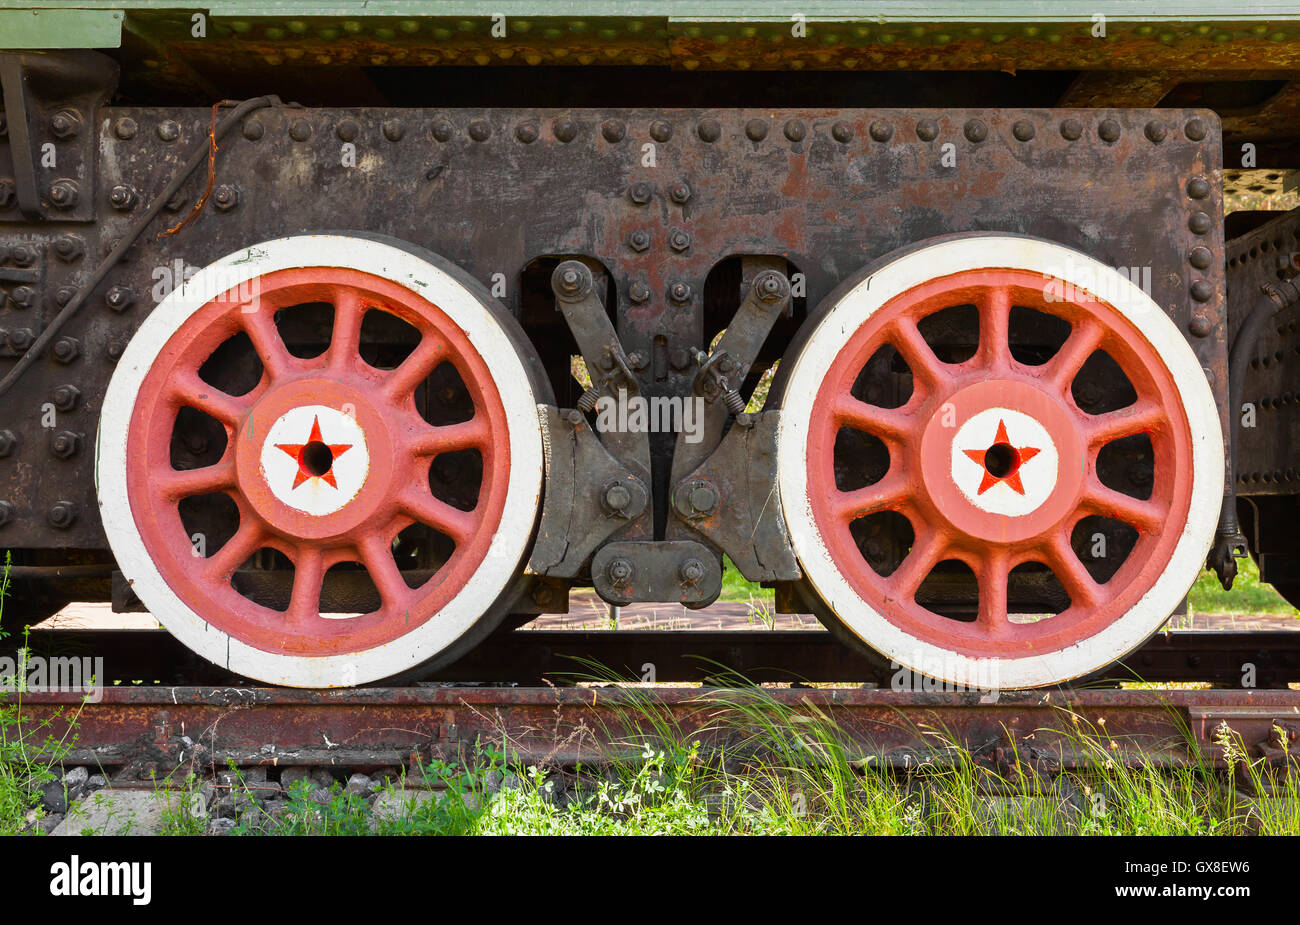 Red wheels with stars of railway gun system. Soviet railroad artillery system details Stock Photo